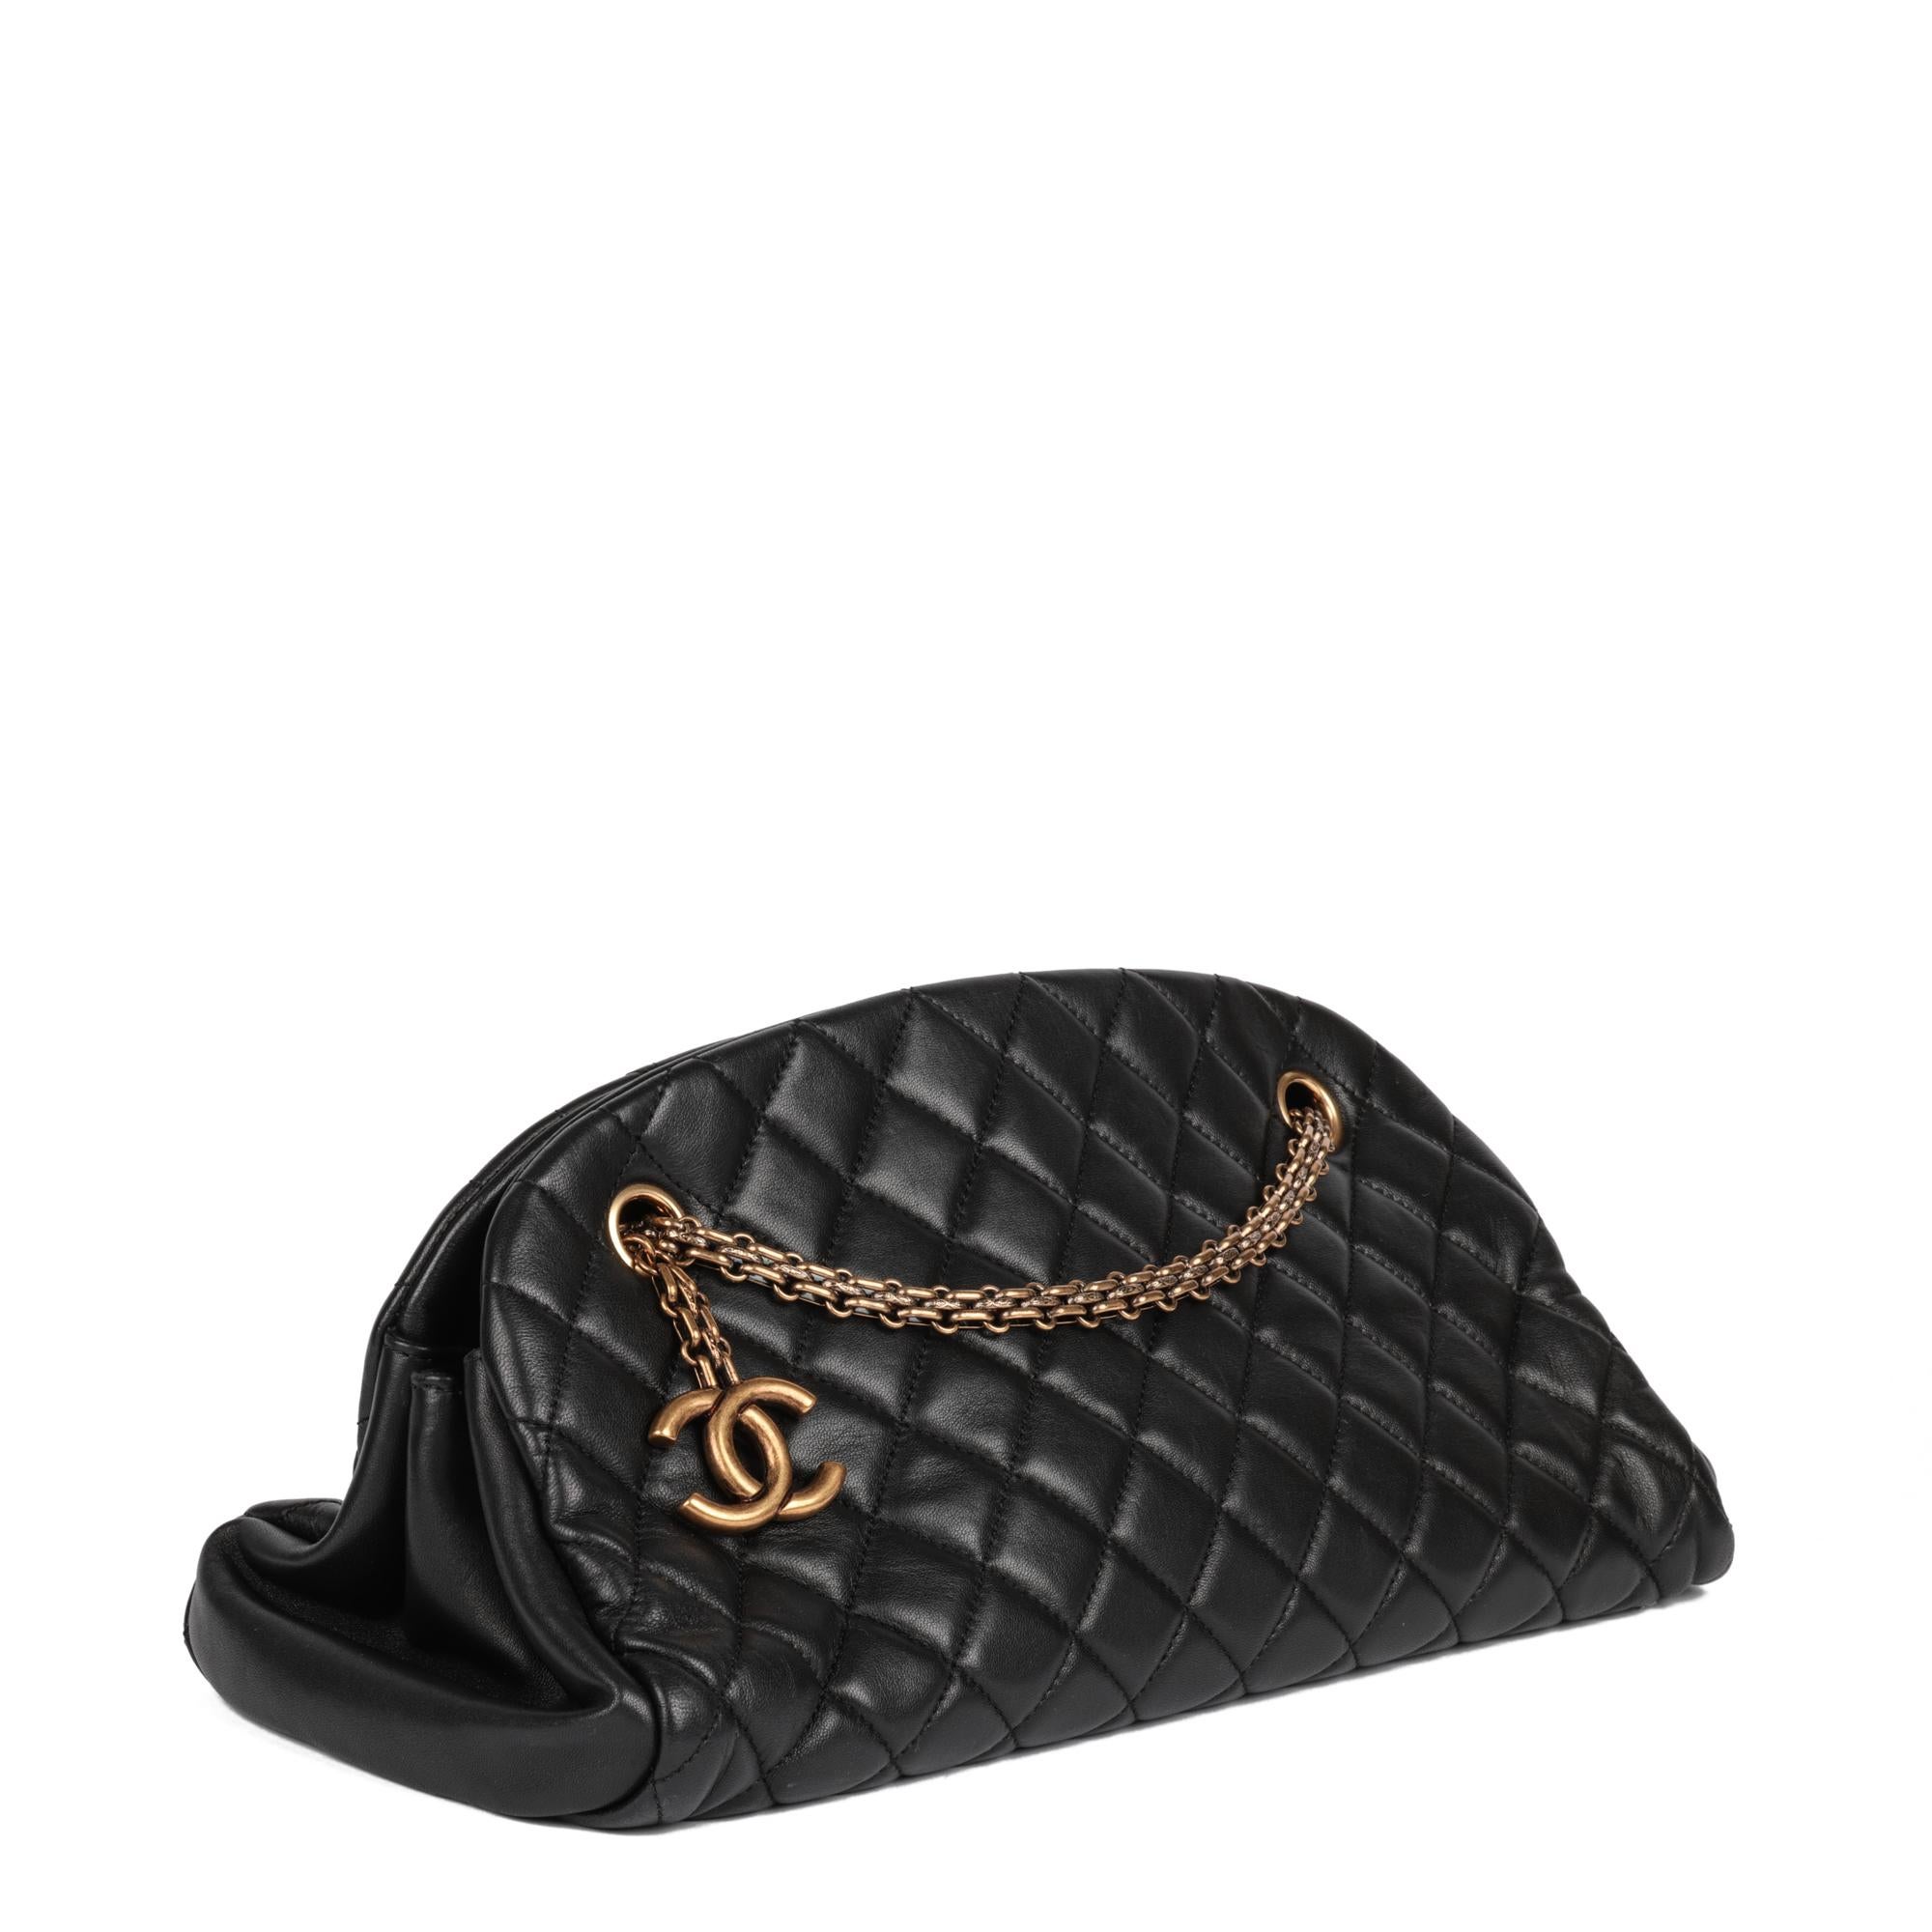 CHANEL
Black Quilted Lambskin Just Mademoiselle Bowling Bag

Xupes Reference: HB5064
Serial Number: 14827562
Age (Circa): 2010
Accompanied By: Chanel Dust Bag, Authenticity Card
Authenticity Details: Authenticity Card, Serial Sticker (Made in